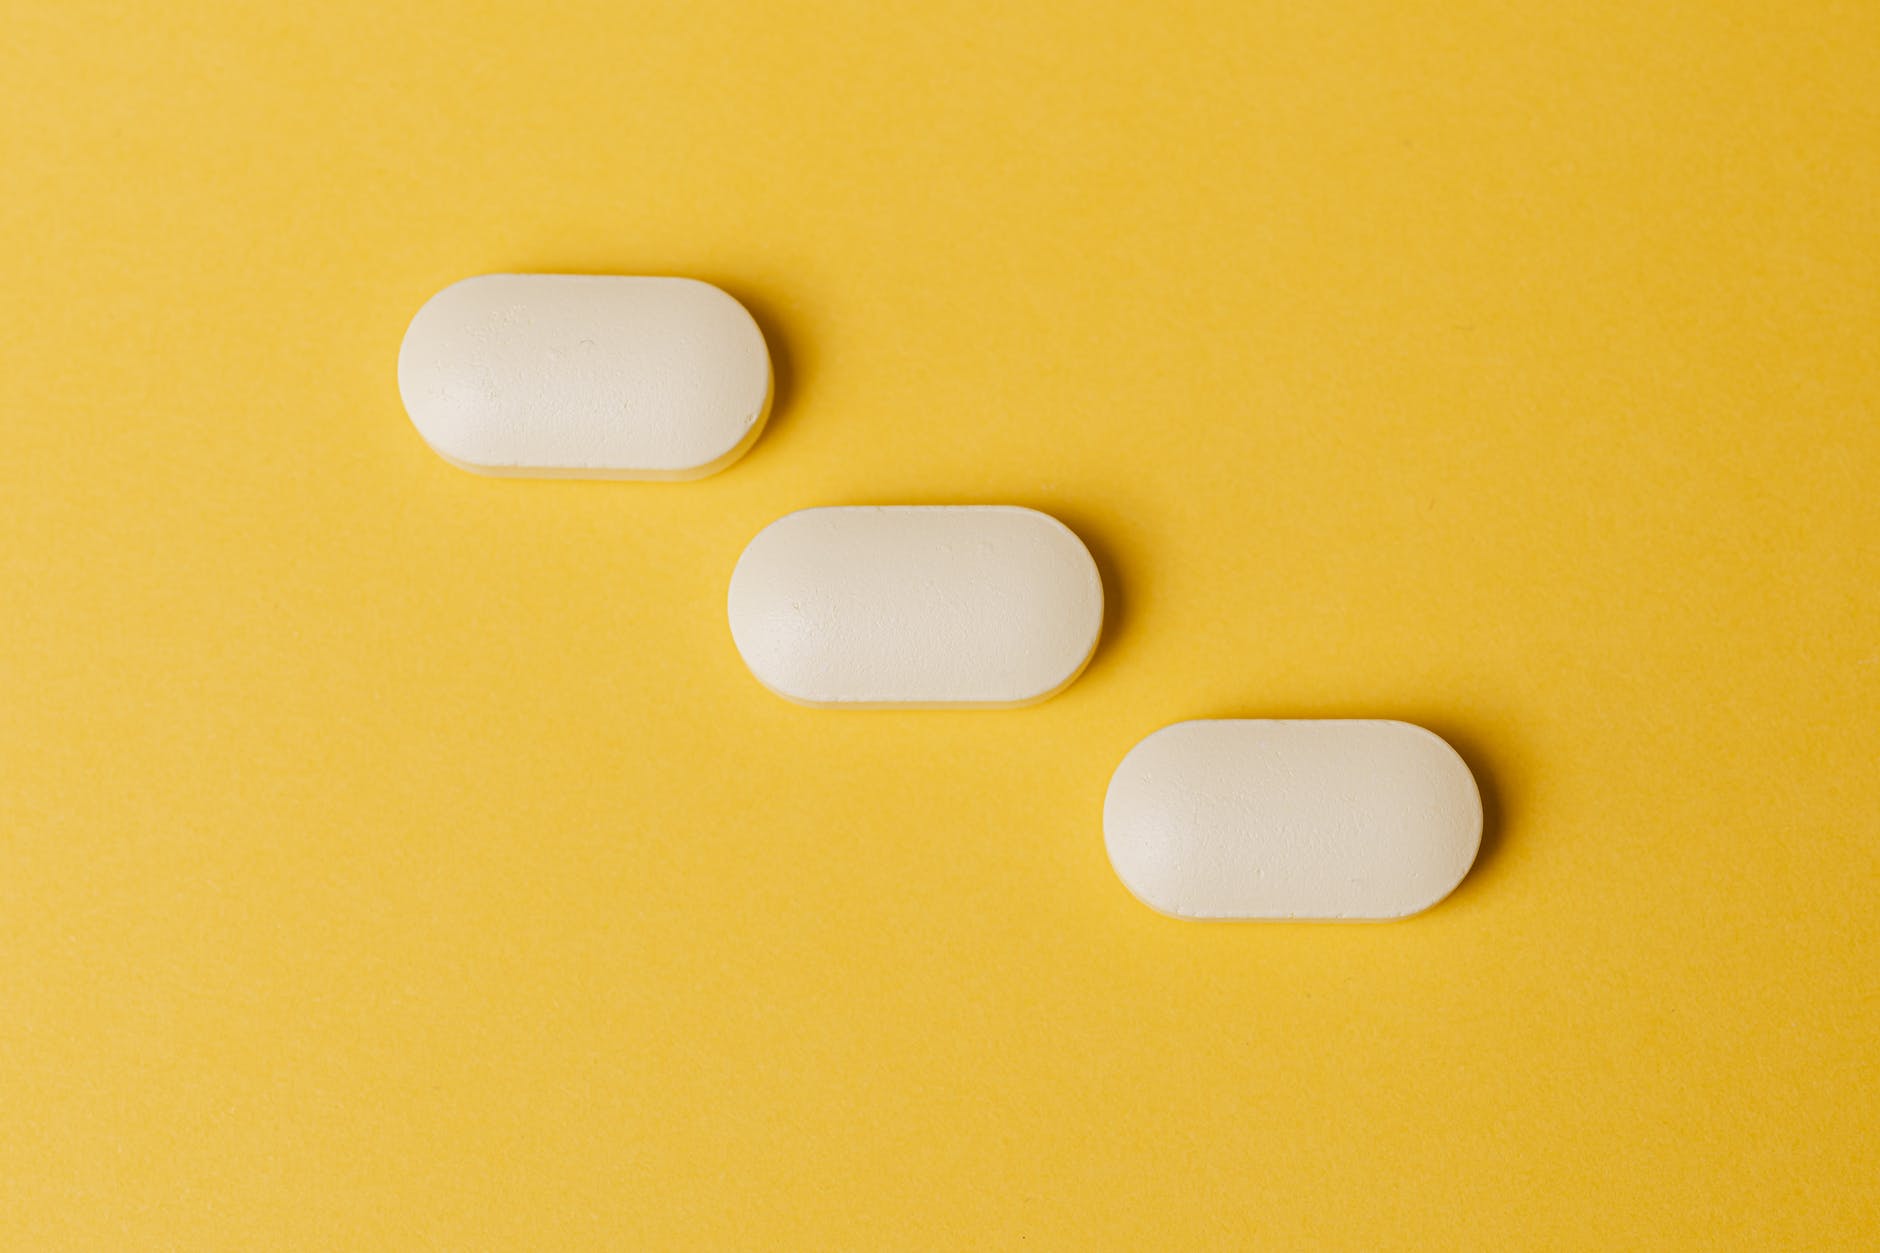 set of pills on yellow surface